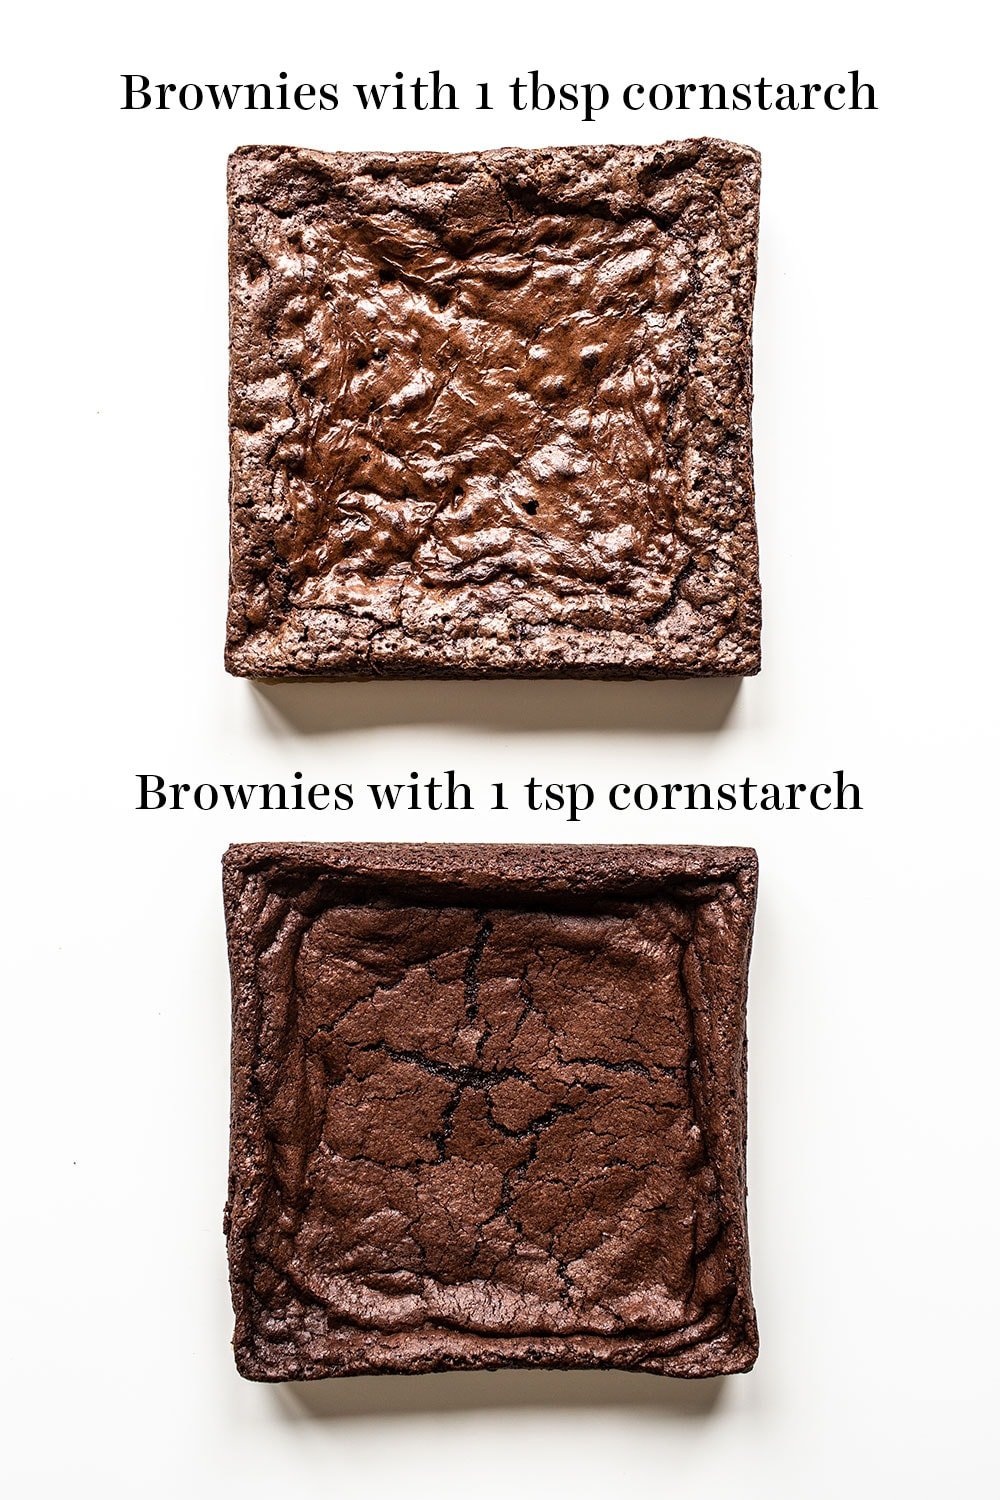 overhead comparison of brownies made with 1 tablespoon of cornstarch vs 1 teaspoon of cornstarch